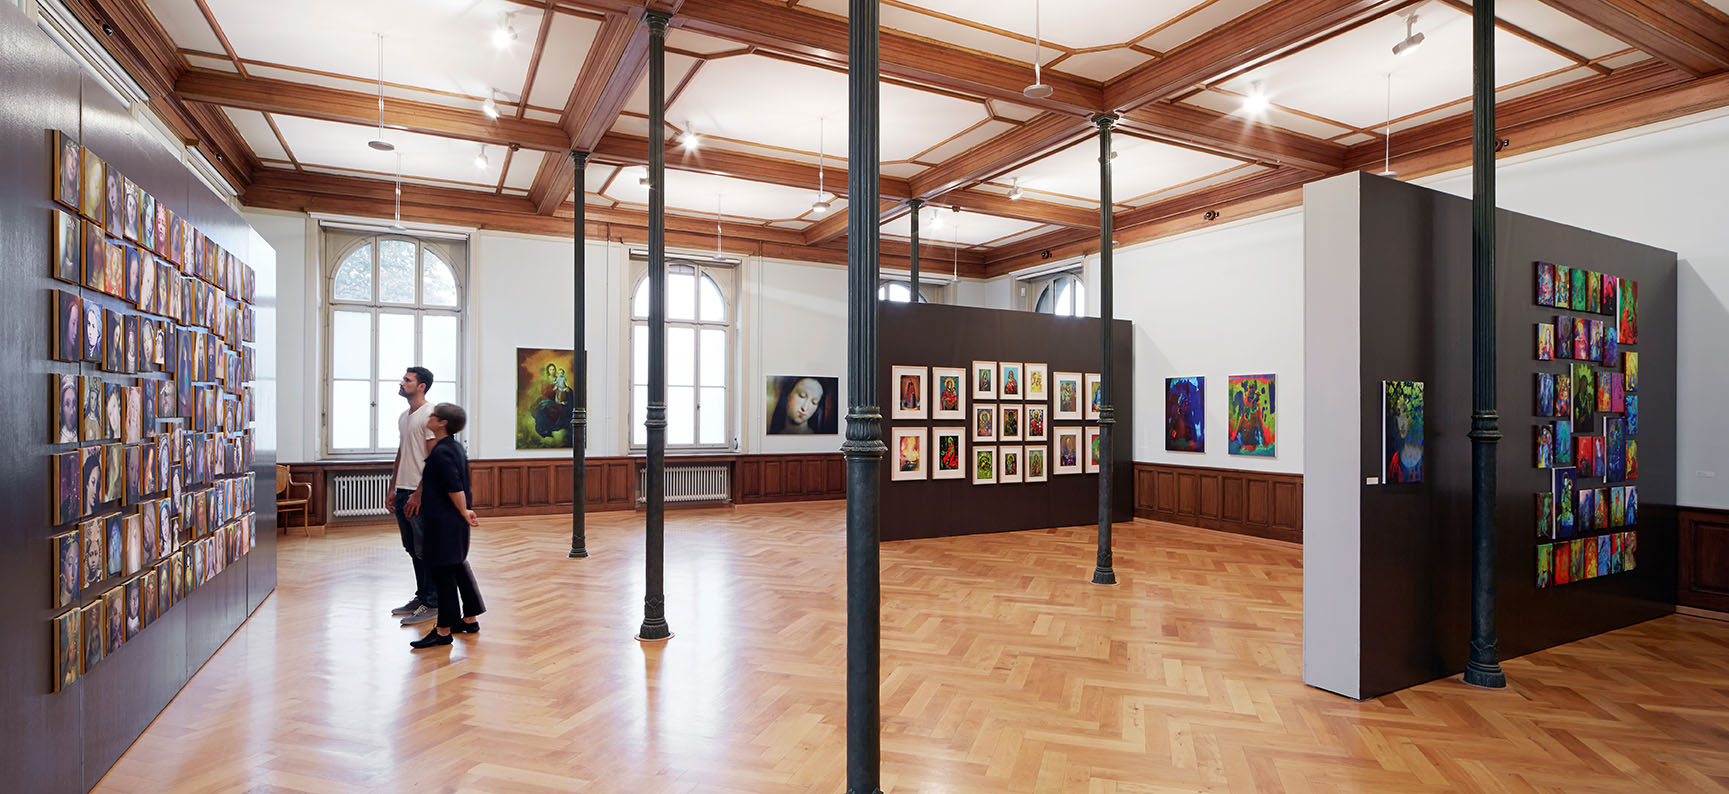 Exhibition space of ETH Zurich’s Collection of Prints and Drawings 2014 © ETH library / Frank Blaser